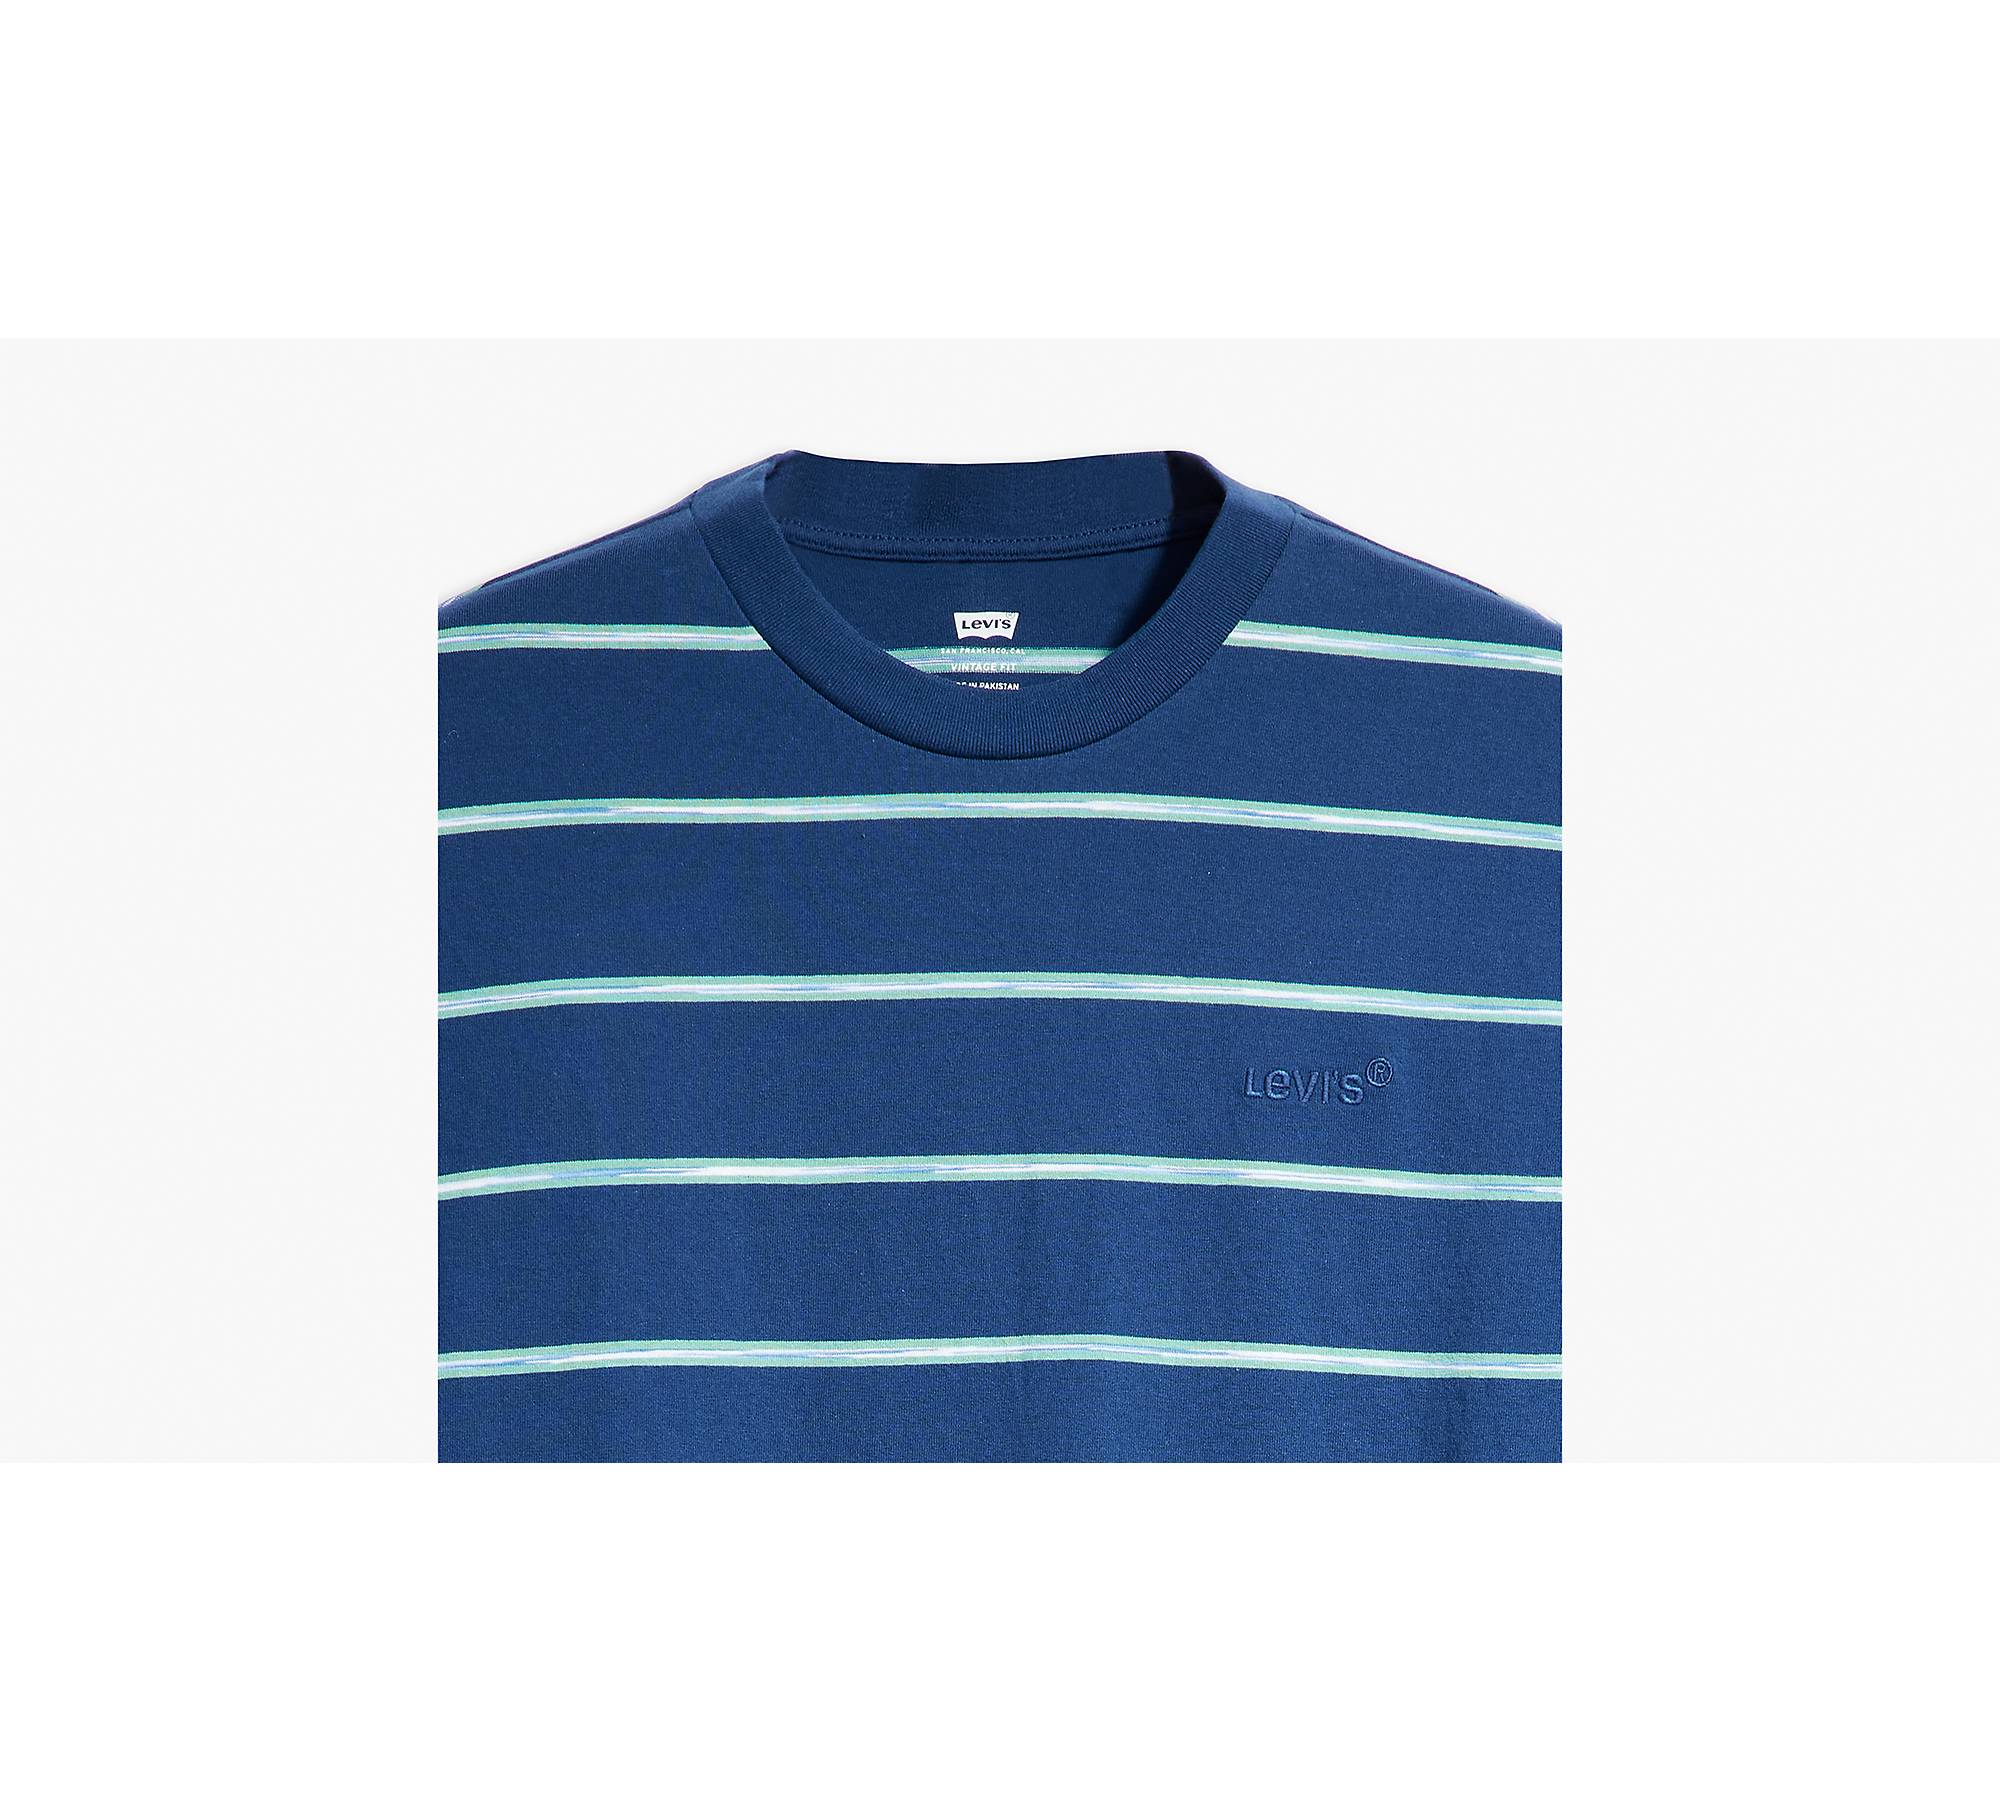 Striped Red Tab™ Vintage T-shirt - Multi-color | Levi's® US